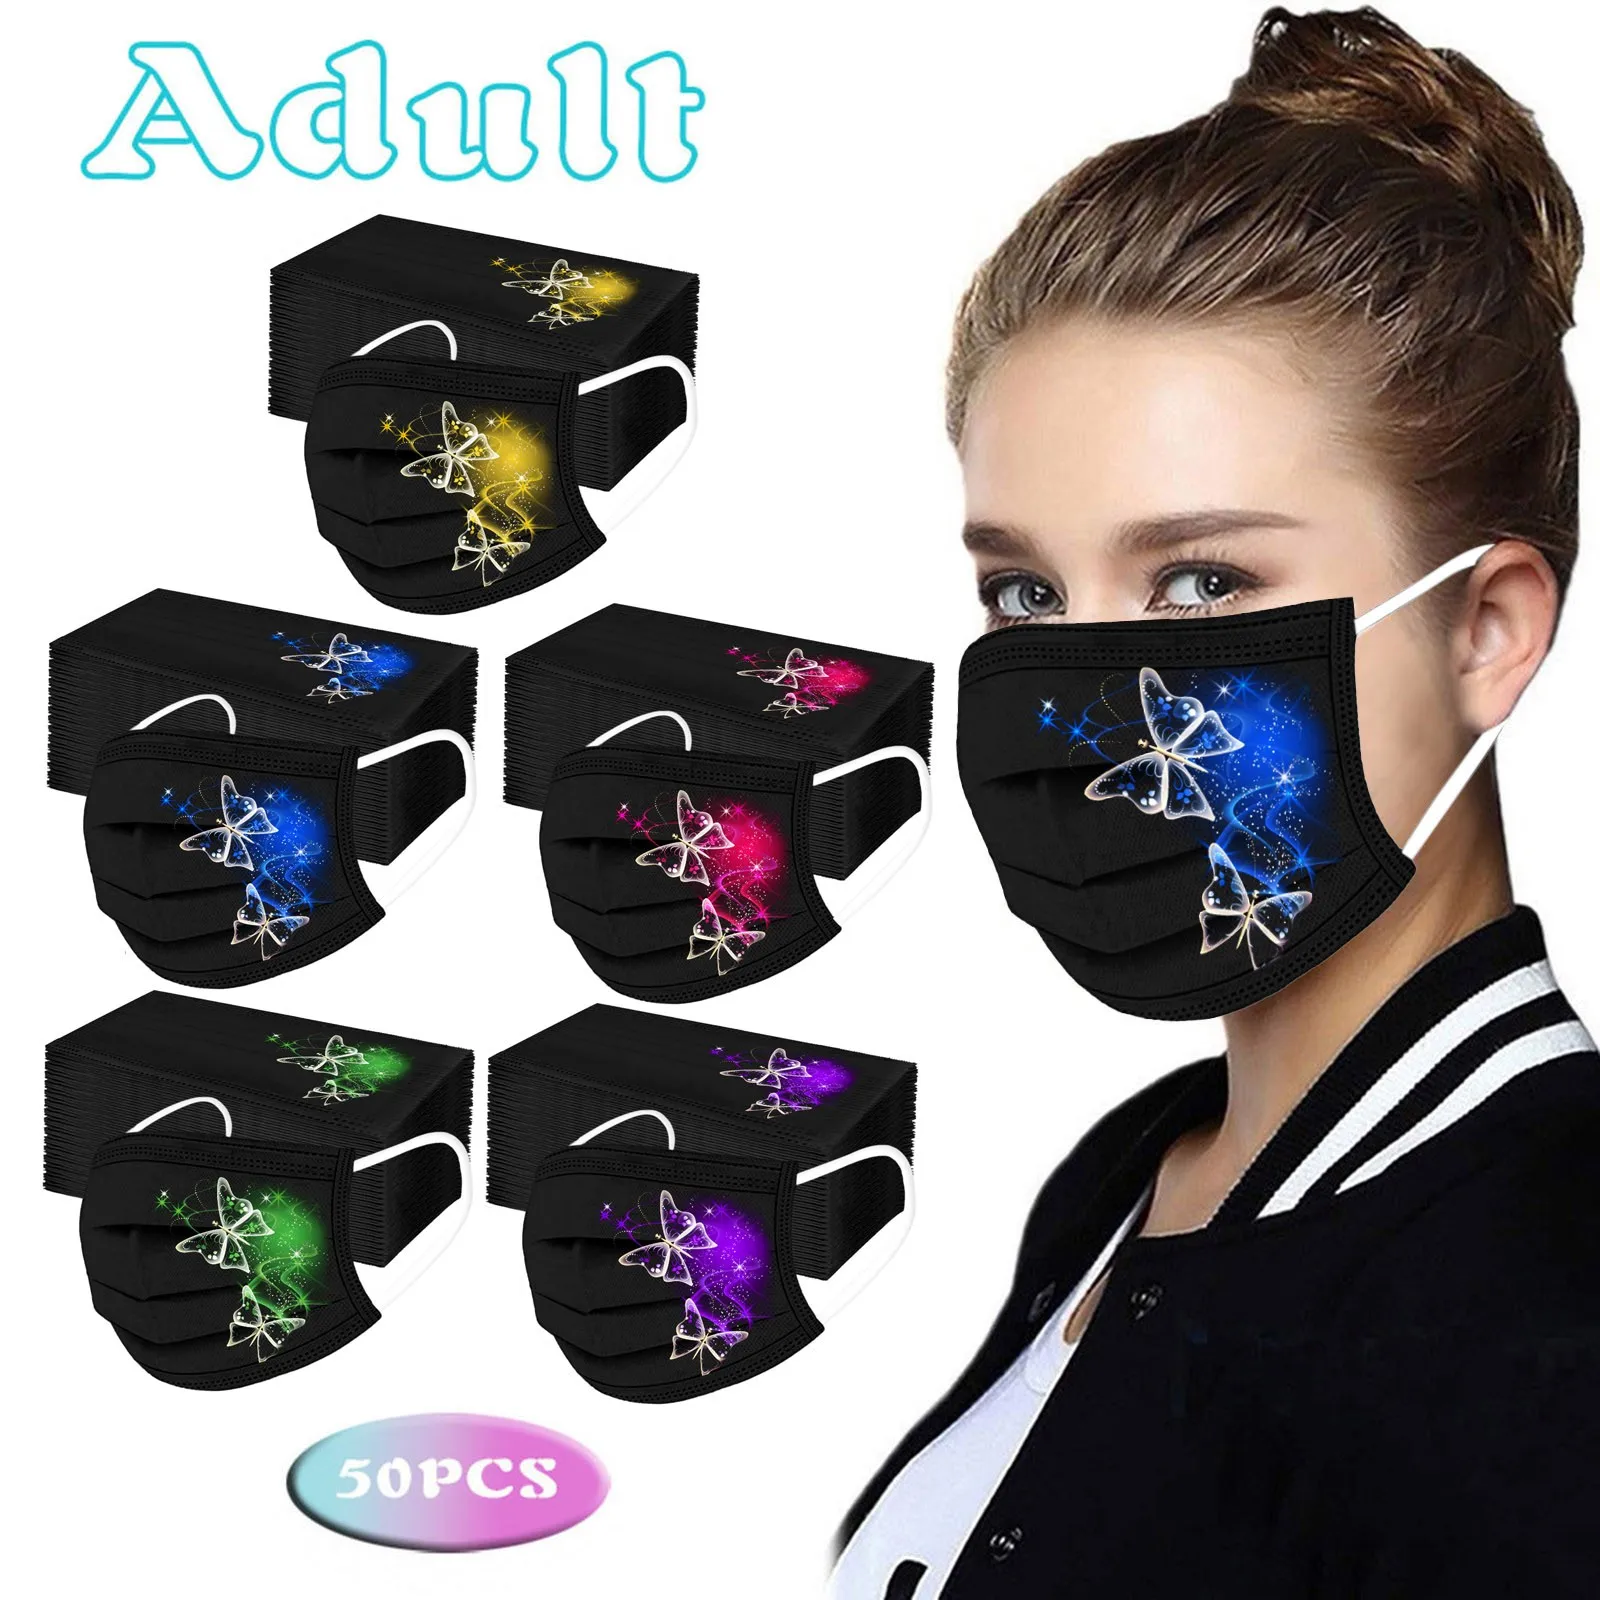 

50pc Disposable Adults Butterfly Print Mask Protective Face Masks Mouth Cover Mascherine Mascarillas Halloween Cosplay Masque